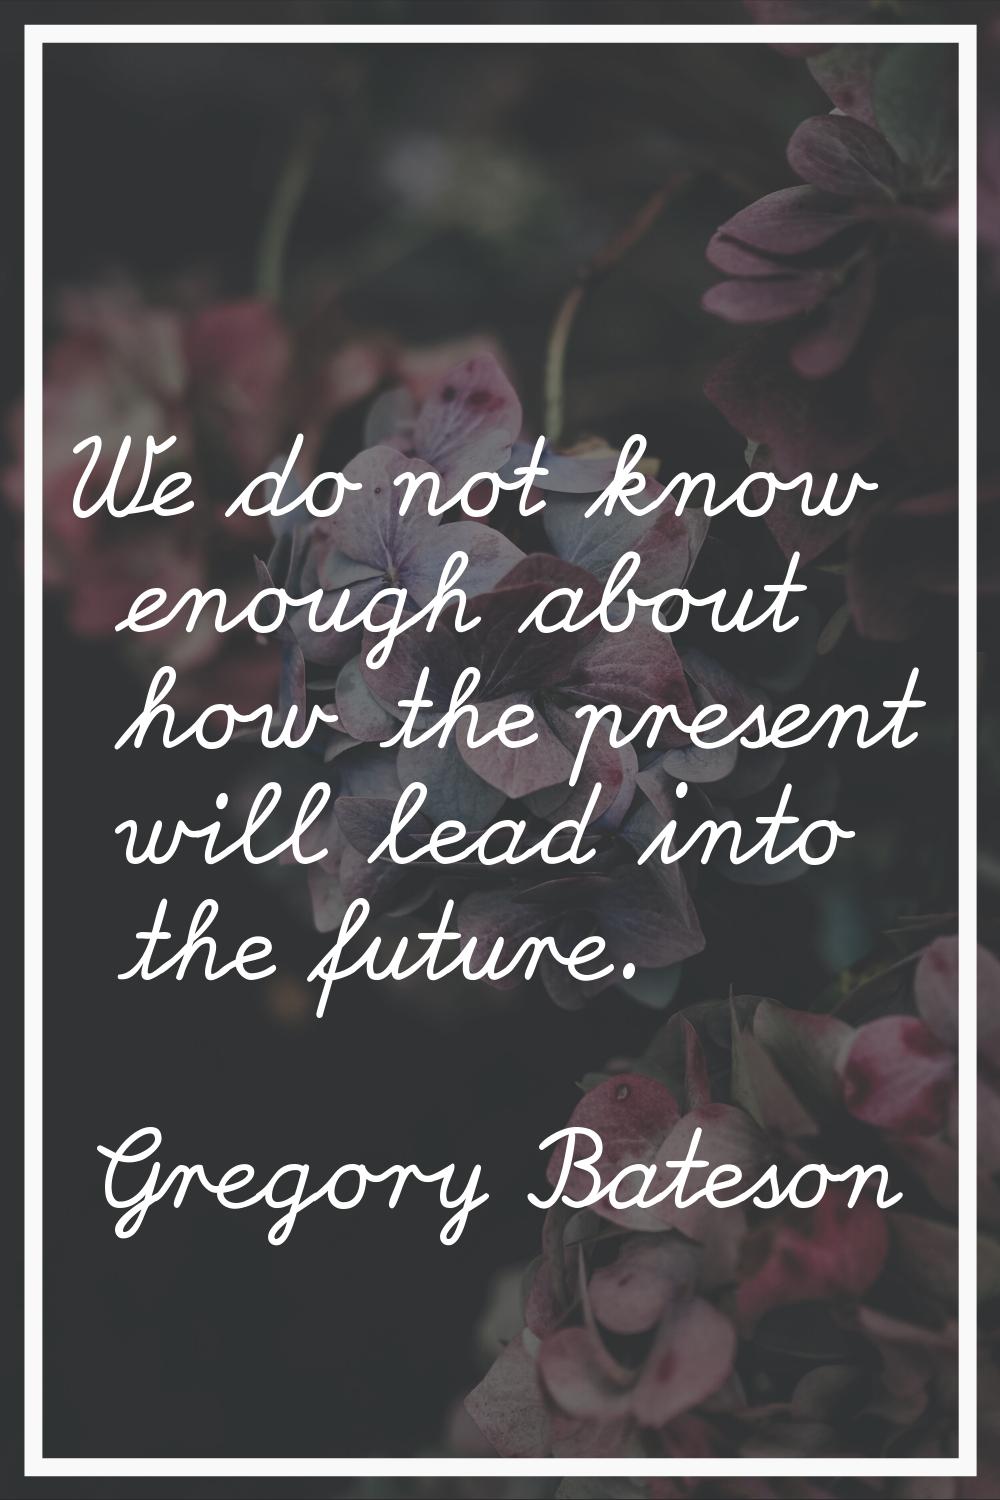 We do not know enough about how the present will lead into the future.